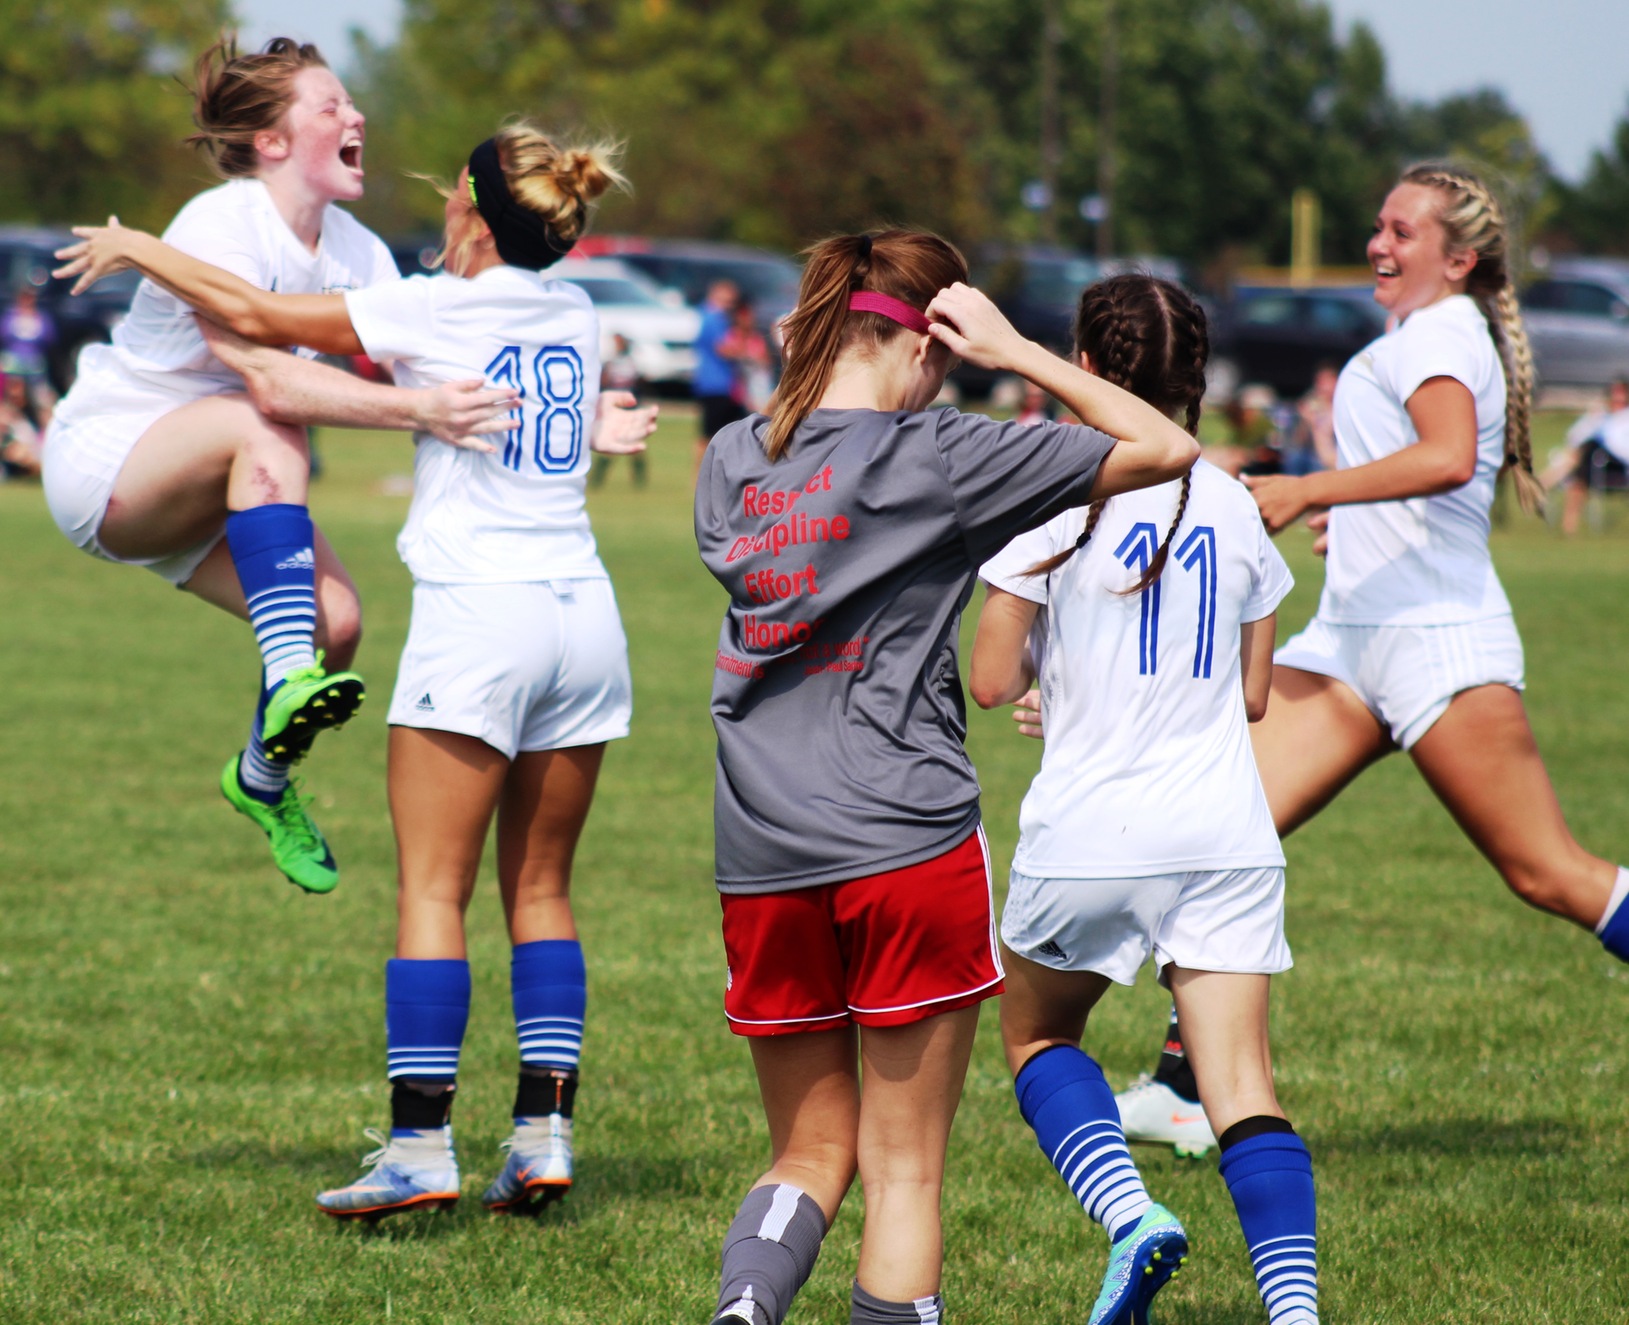 Emma Eden (in air) celebrates after scoring a goal off a header on a corner kick in first half of Sunday's match.